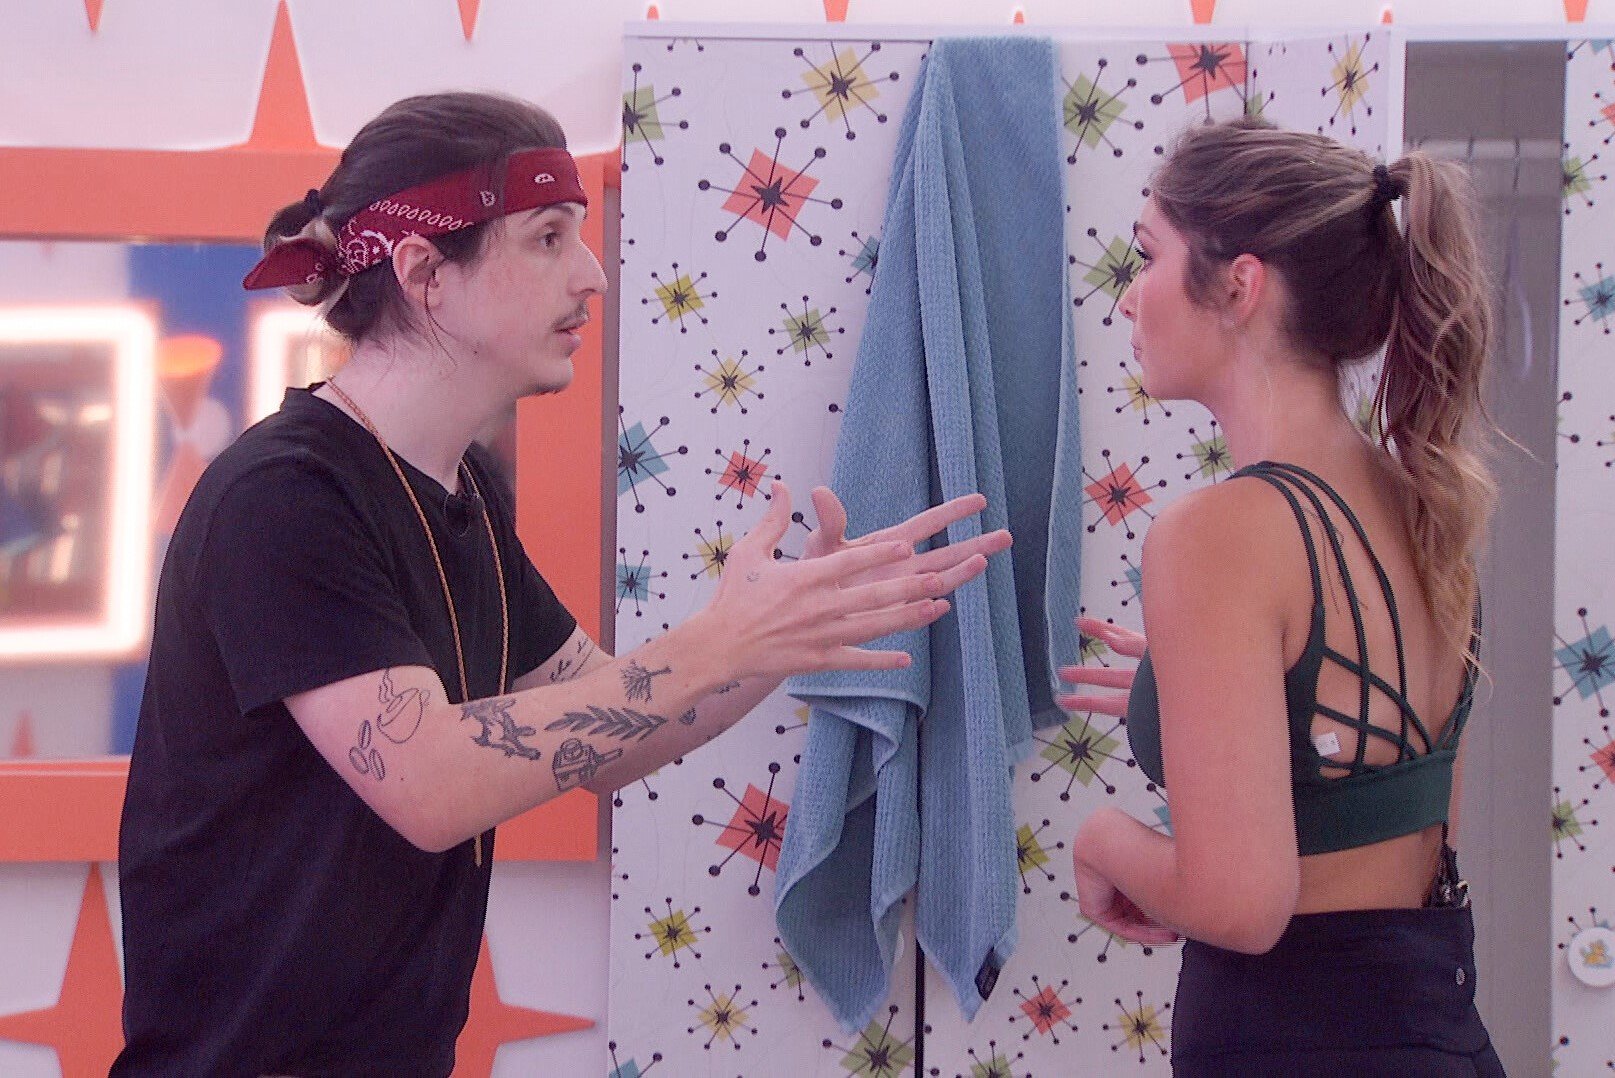 Matthew Turner and Alyssa Snider, who, according to 'Big Brother 24' spoilers, is going to be evicted on Thursday, Sept. 15, talk during the double eviction. Turner wears a black shirt, red bandana, and the HOH key around his neck. Alyssa wears a dark green sports bra and black leggings.